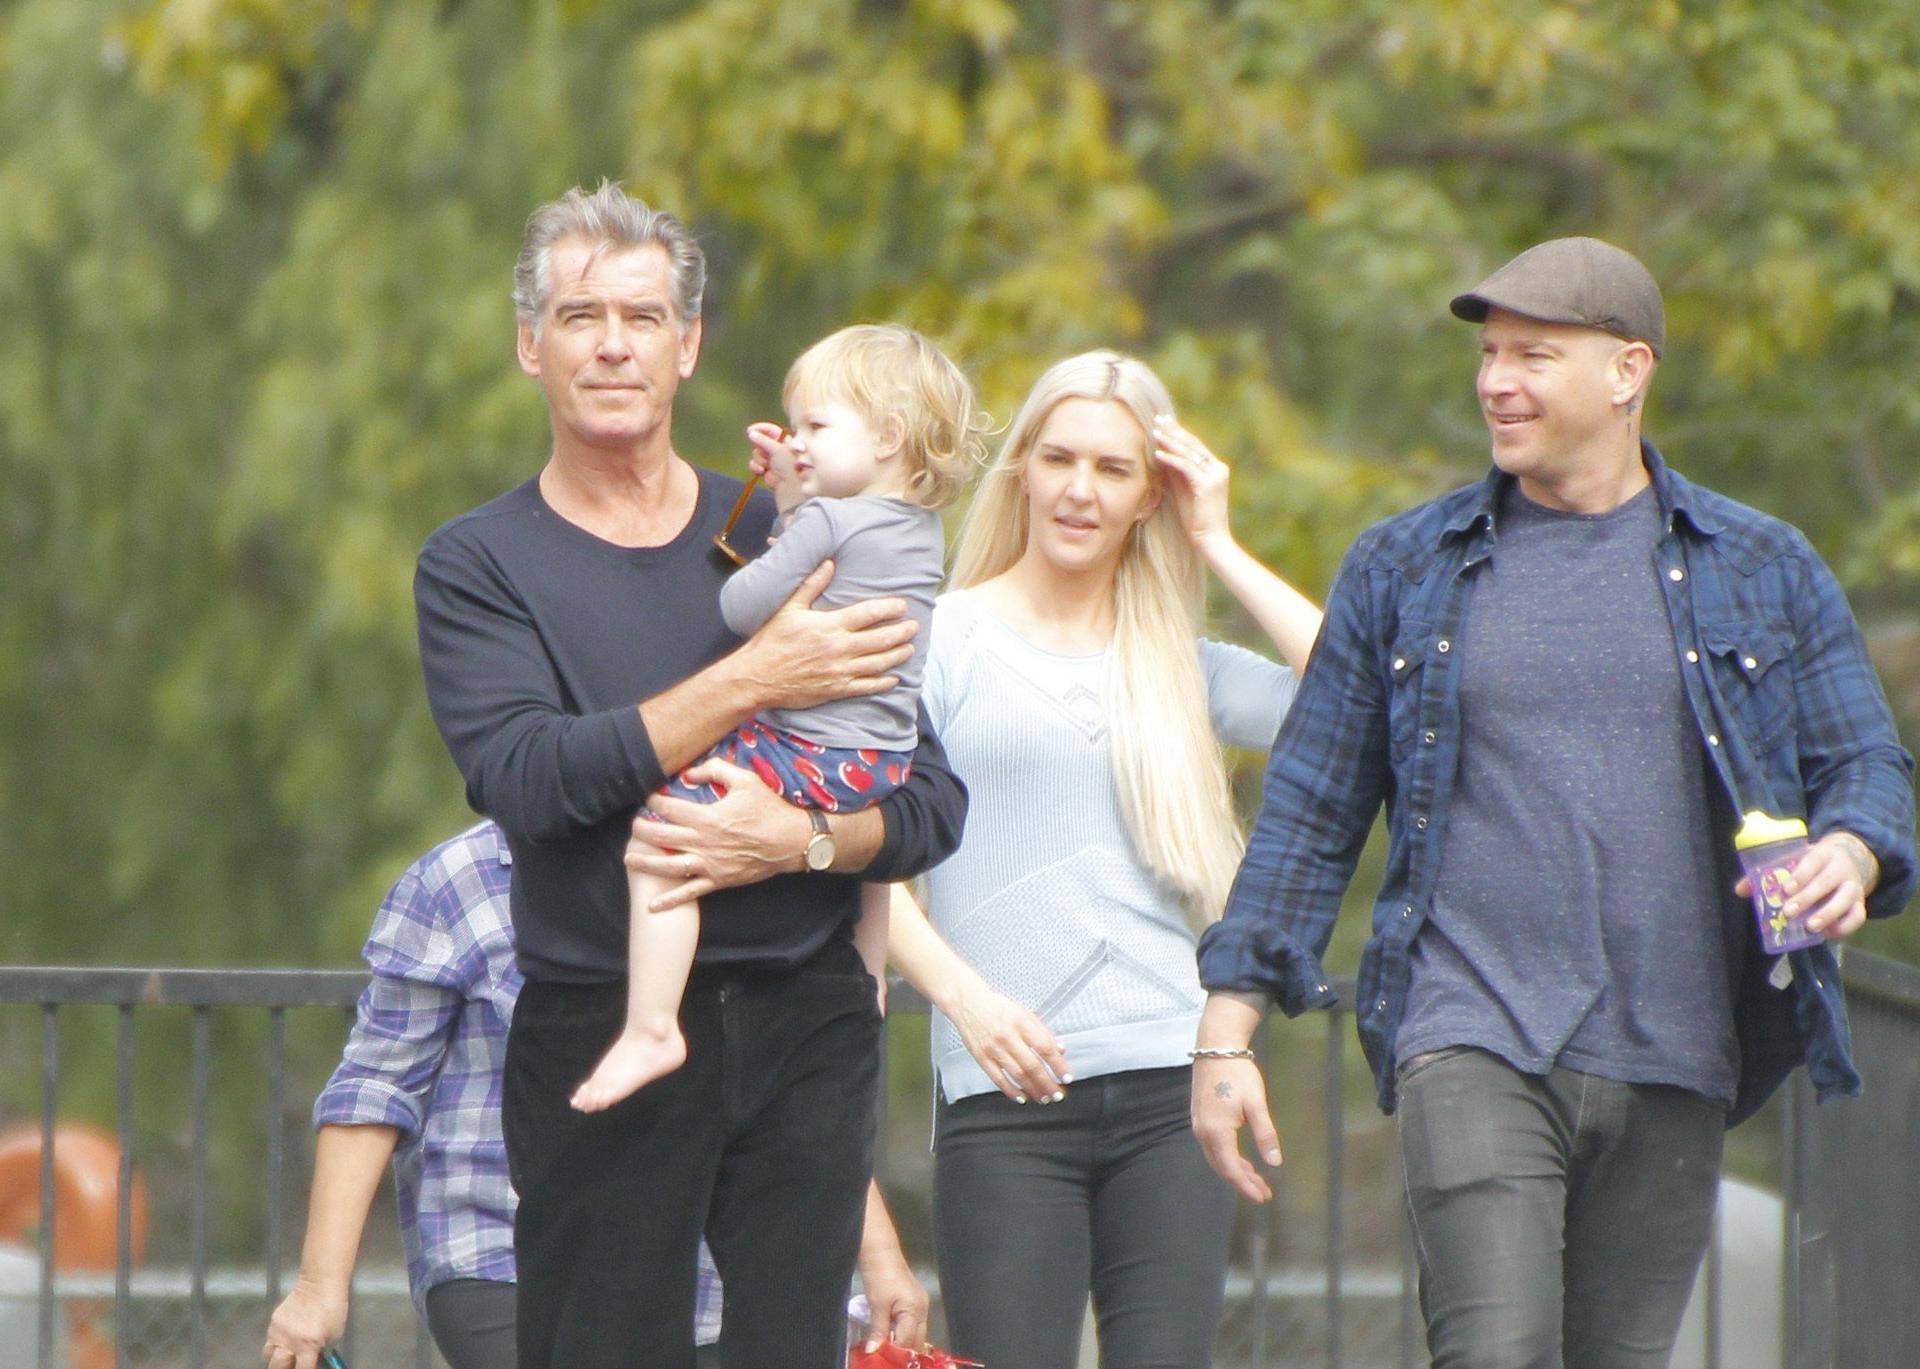 *EXCLUSIVE* Pierce Brosnan spends time with his granddaughter at the park